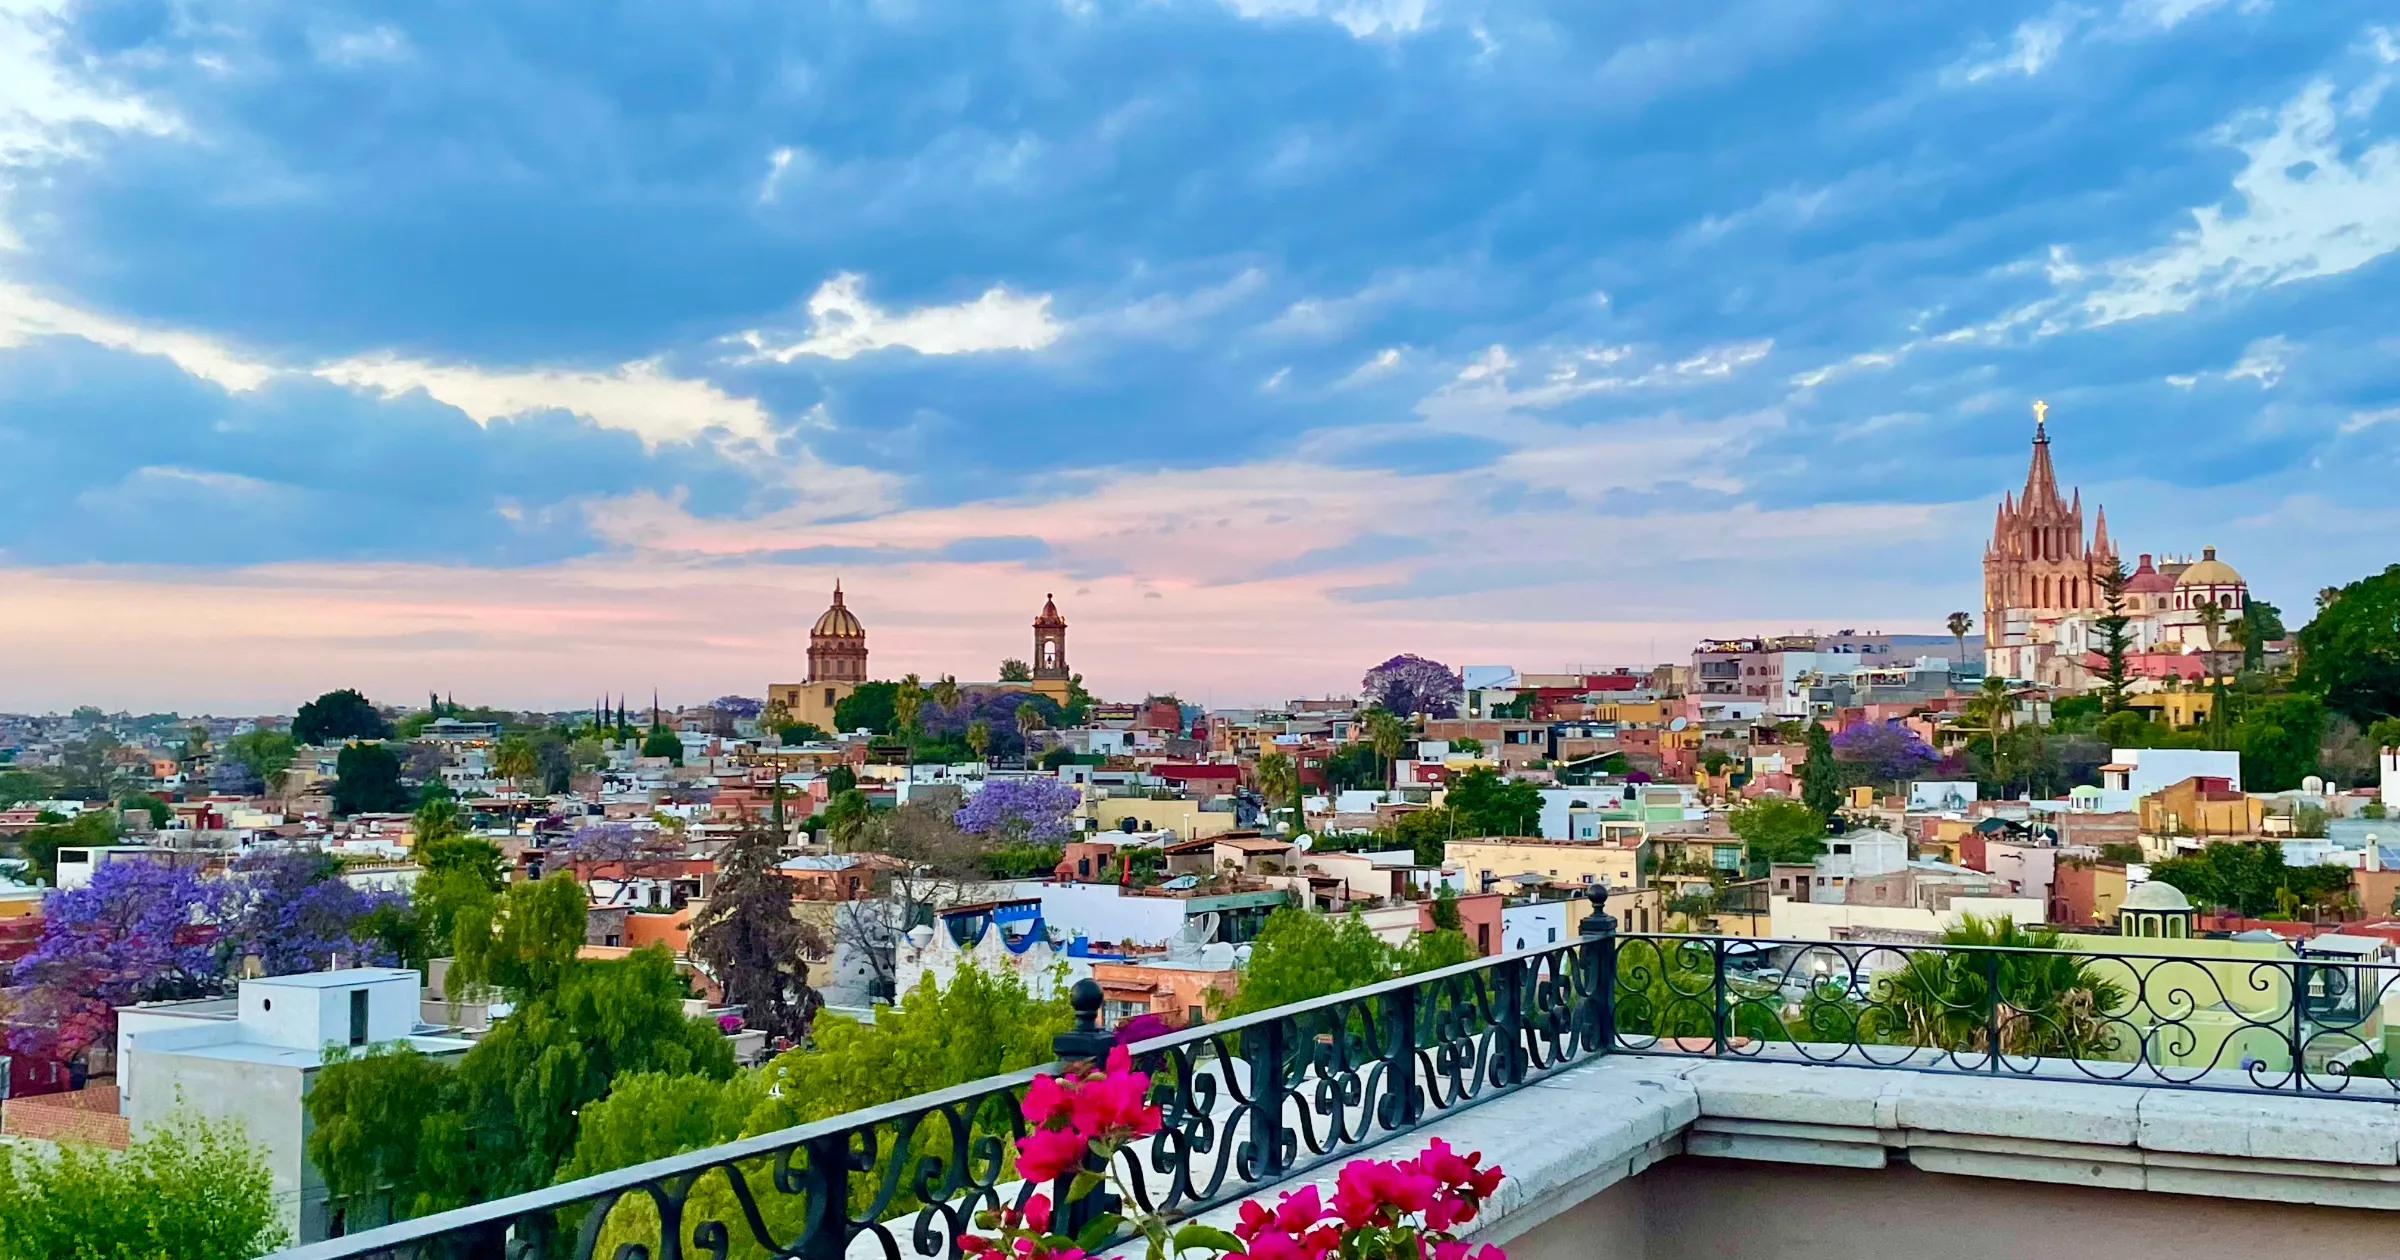 San Miguel de Allende Mexico images of skyline from the Rosewood hotel with a blue pink sky and the Parroquia de San Miguel Arcángel in the distance